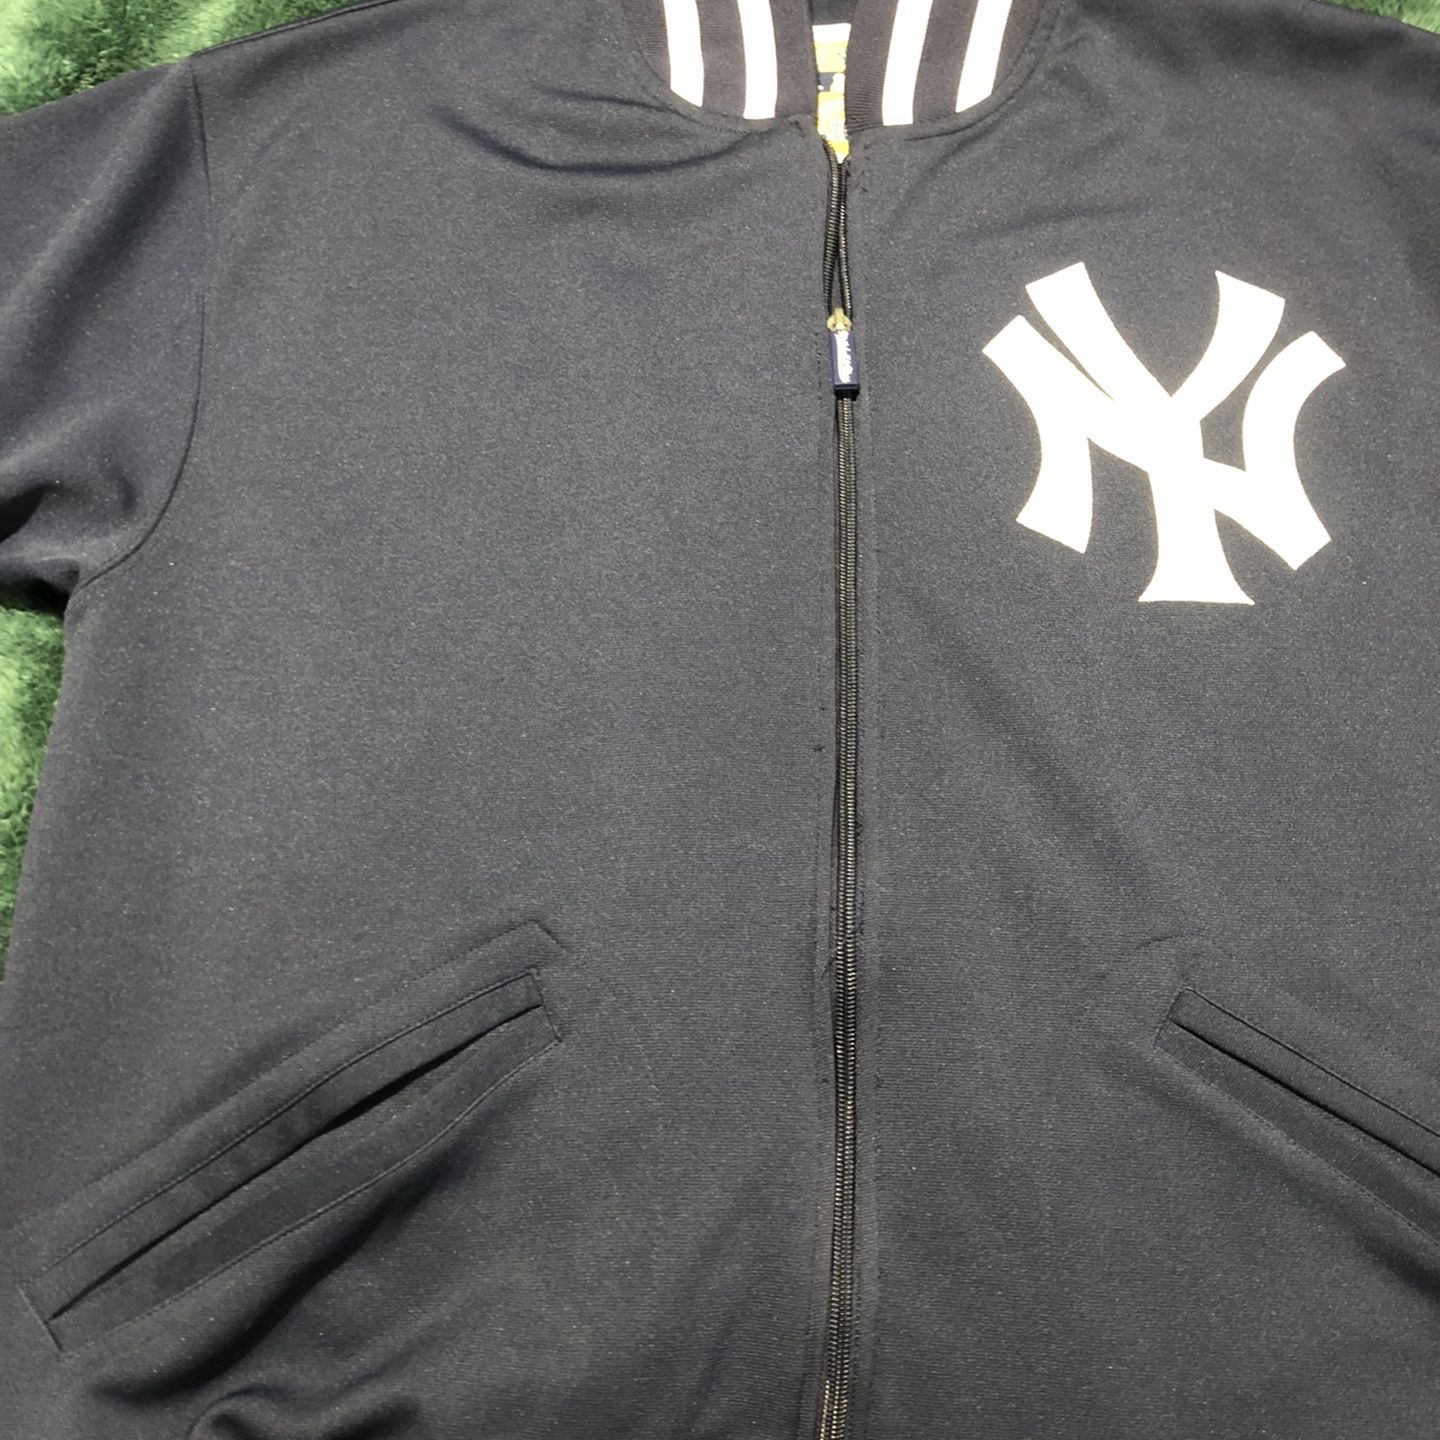 Mitchell & Ness Yankees Jacket Size Large for Sale in Brooklyn, NY